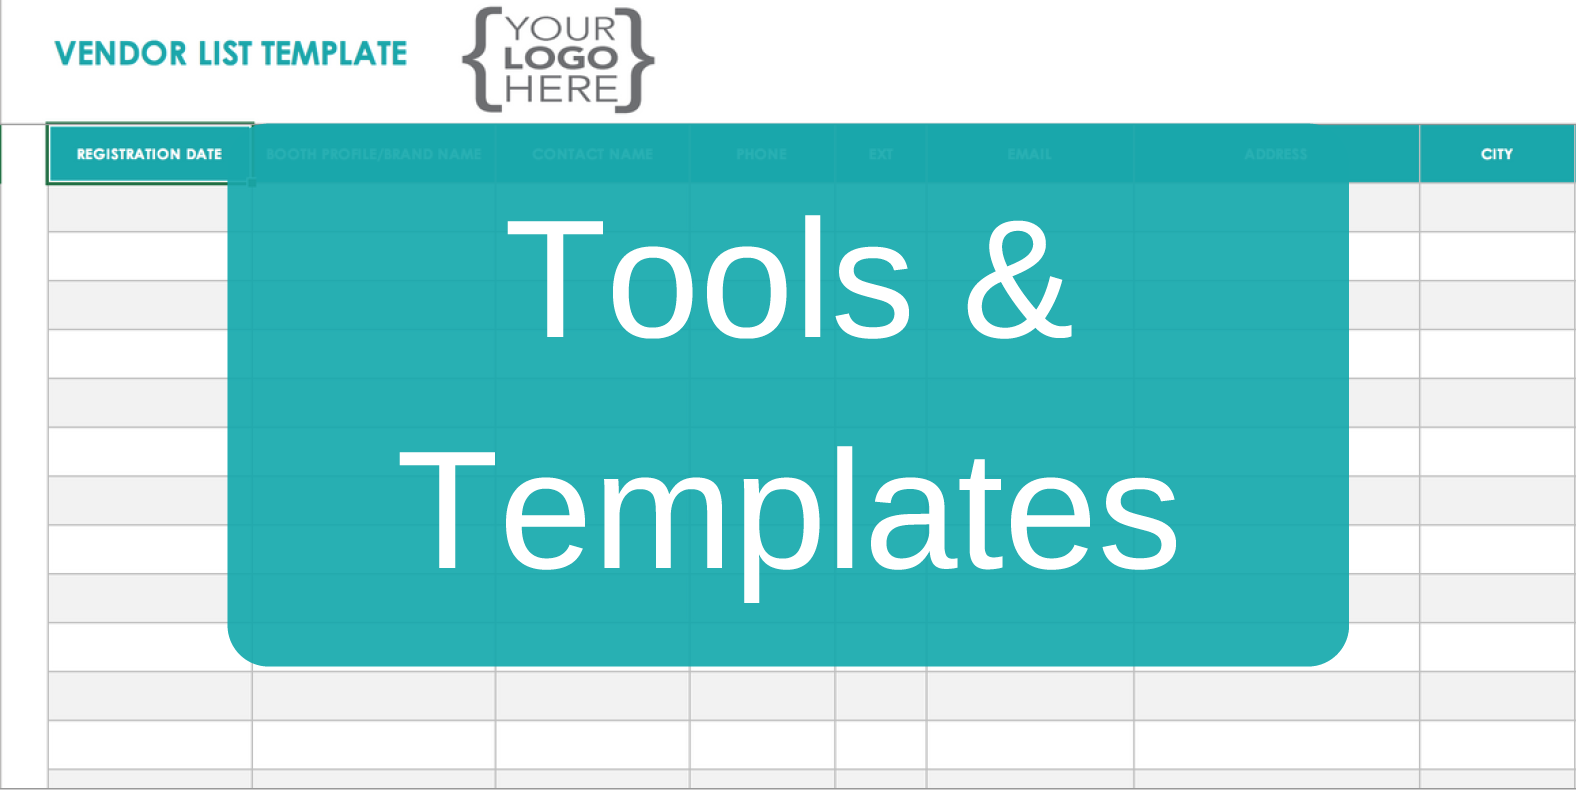 Event Industry Tools & Templates